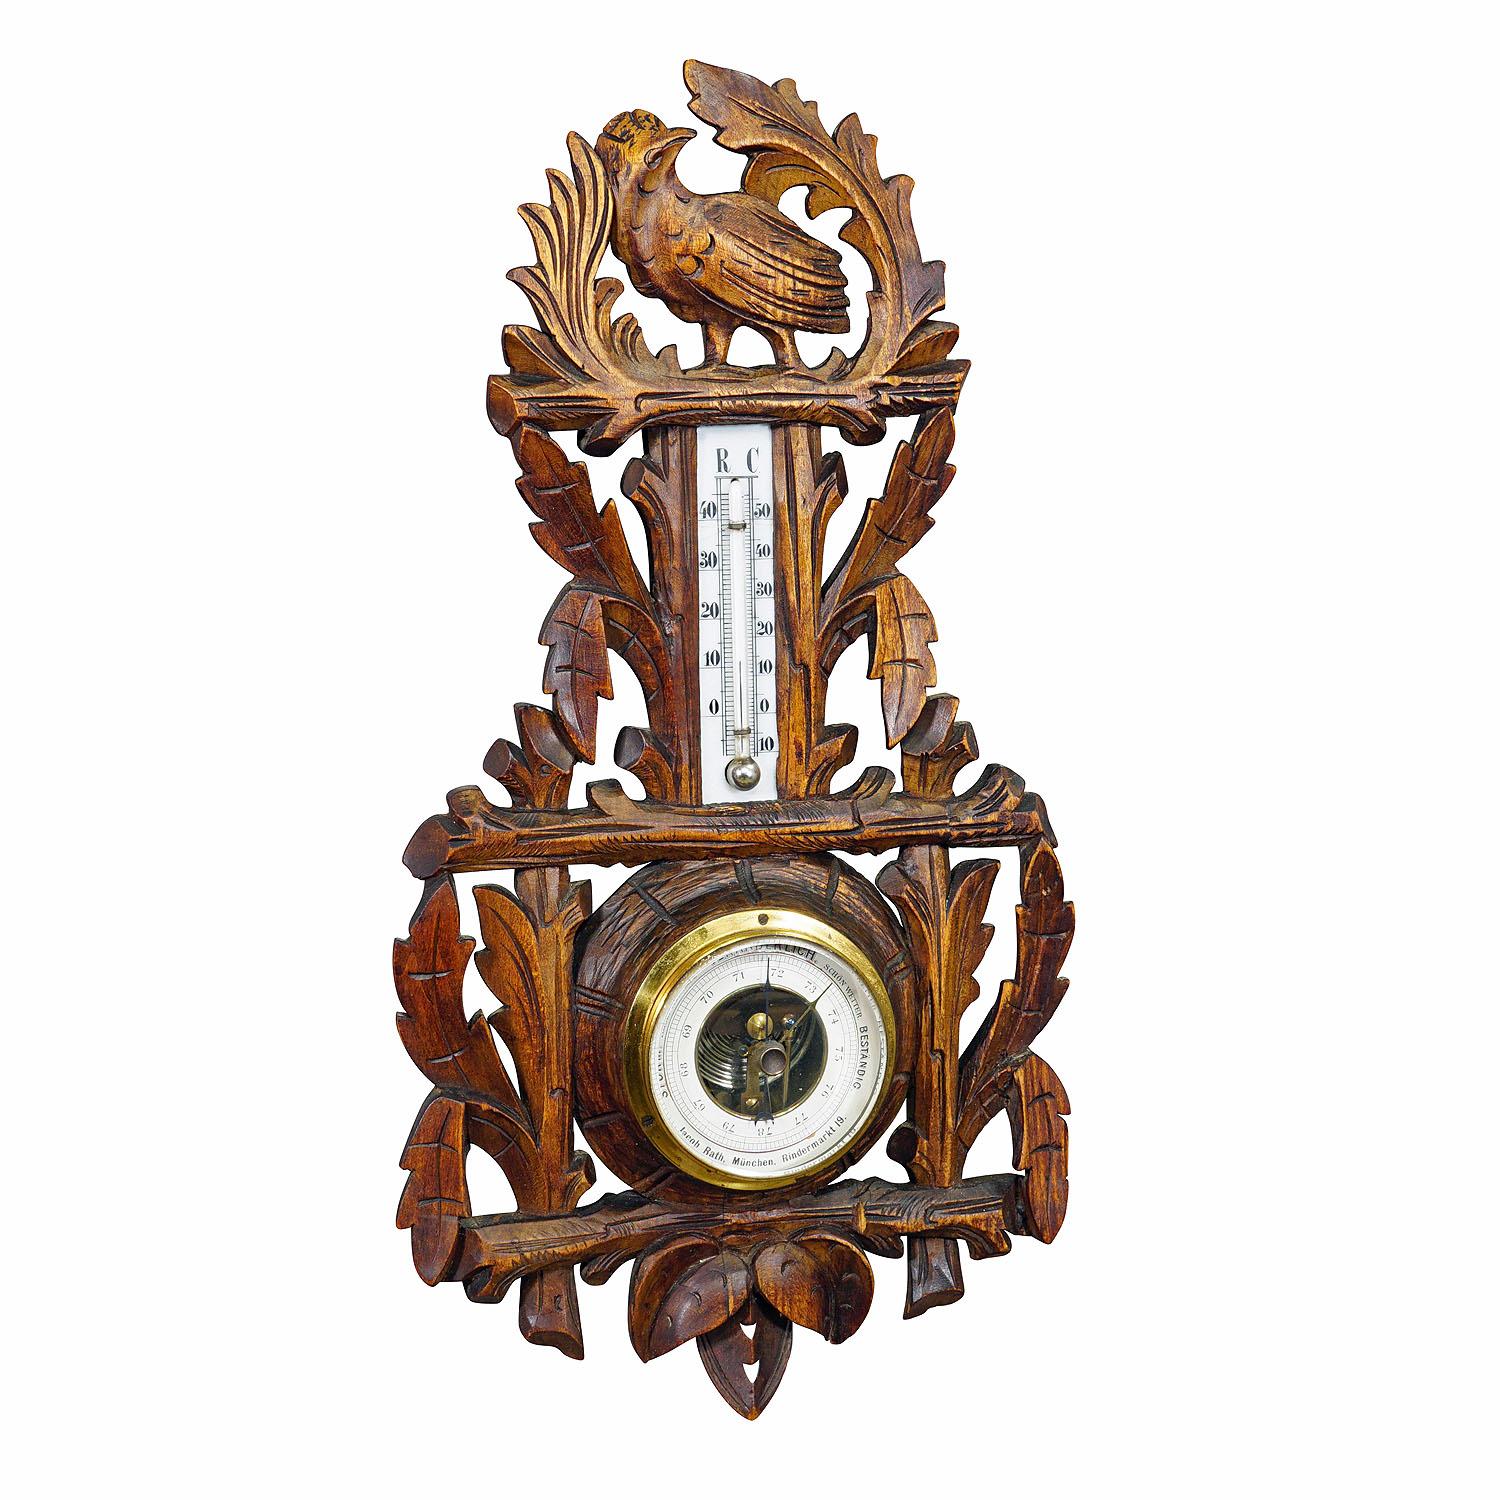 A Wooden Carved Black Forest Weather Station with Bird

A Black Forest meteorological station with barometer and thermometer. Handcarved in Germany around 1900. Very good condition, thermometer scala with fine hairline. Function not tested.

The